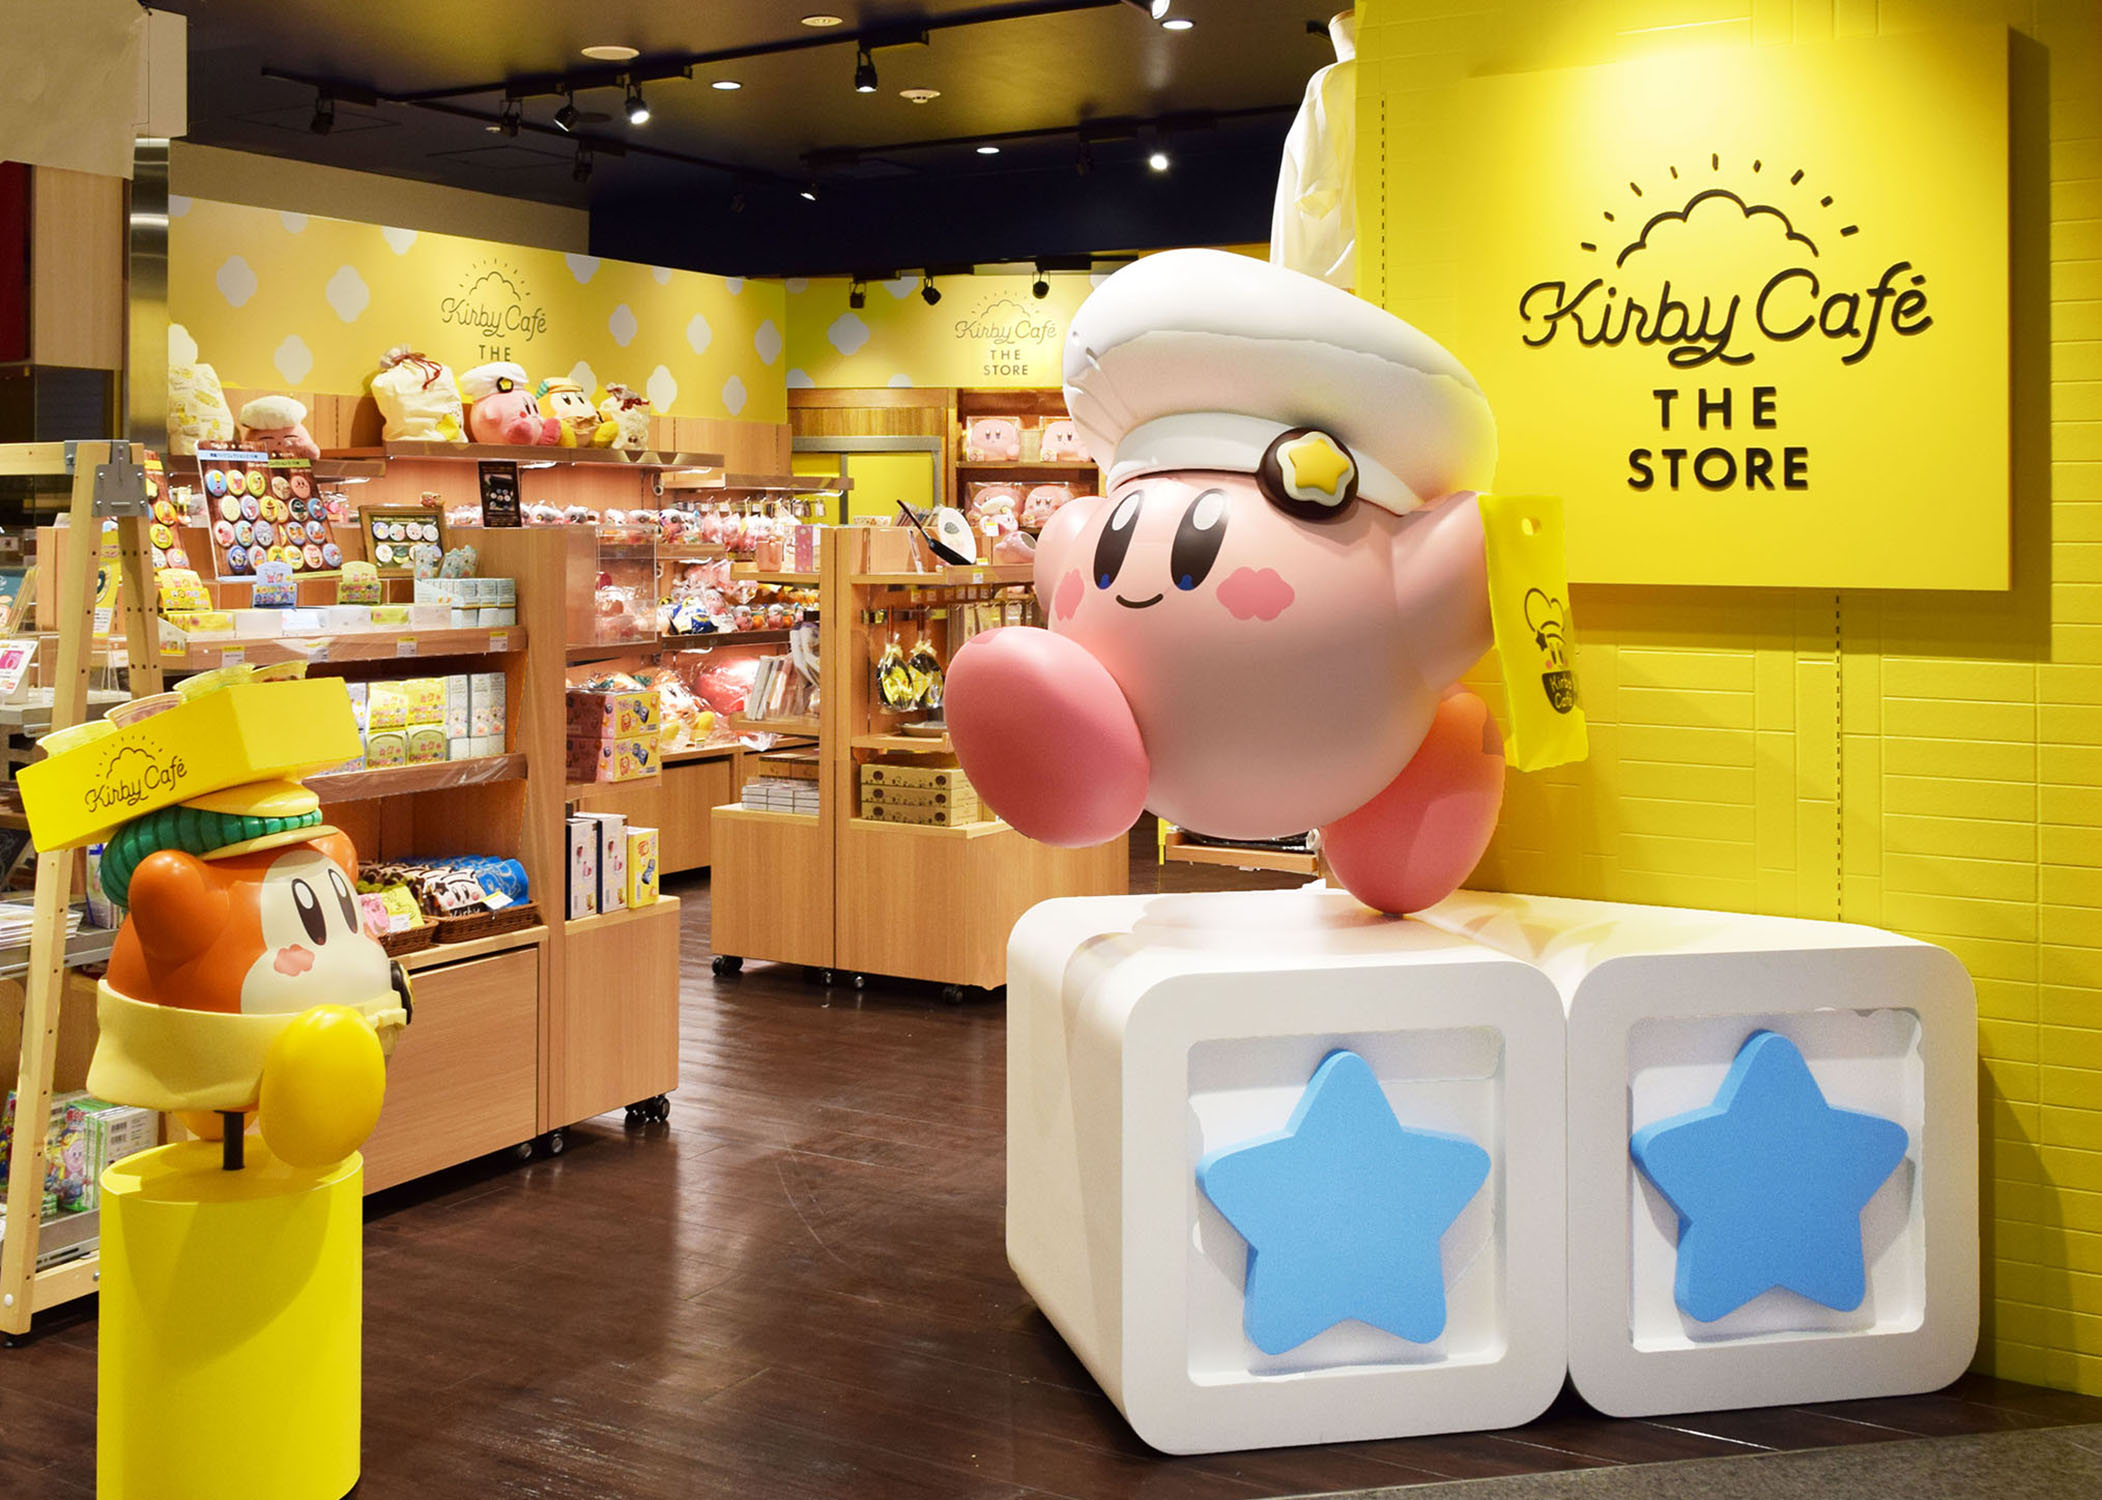  Kirby Café THE STORE（カービィカフェ ザ・ストア）